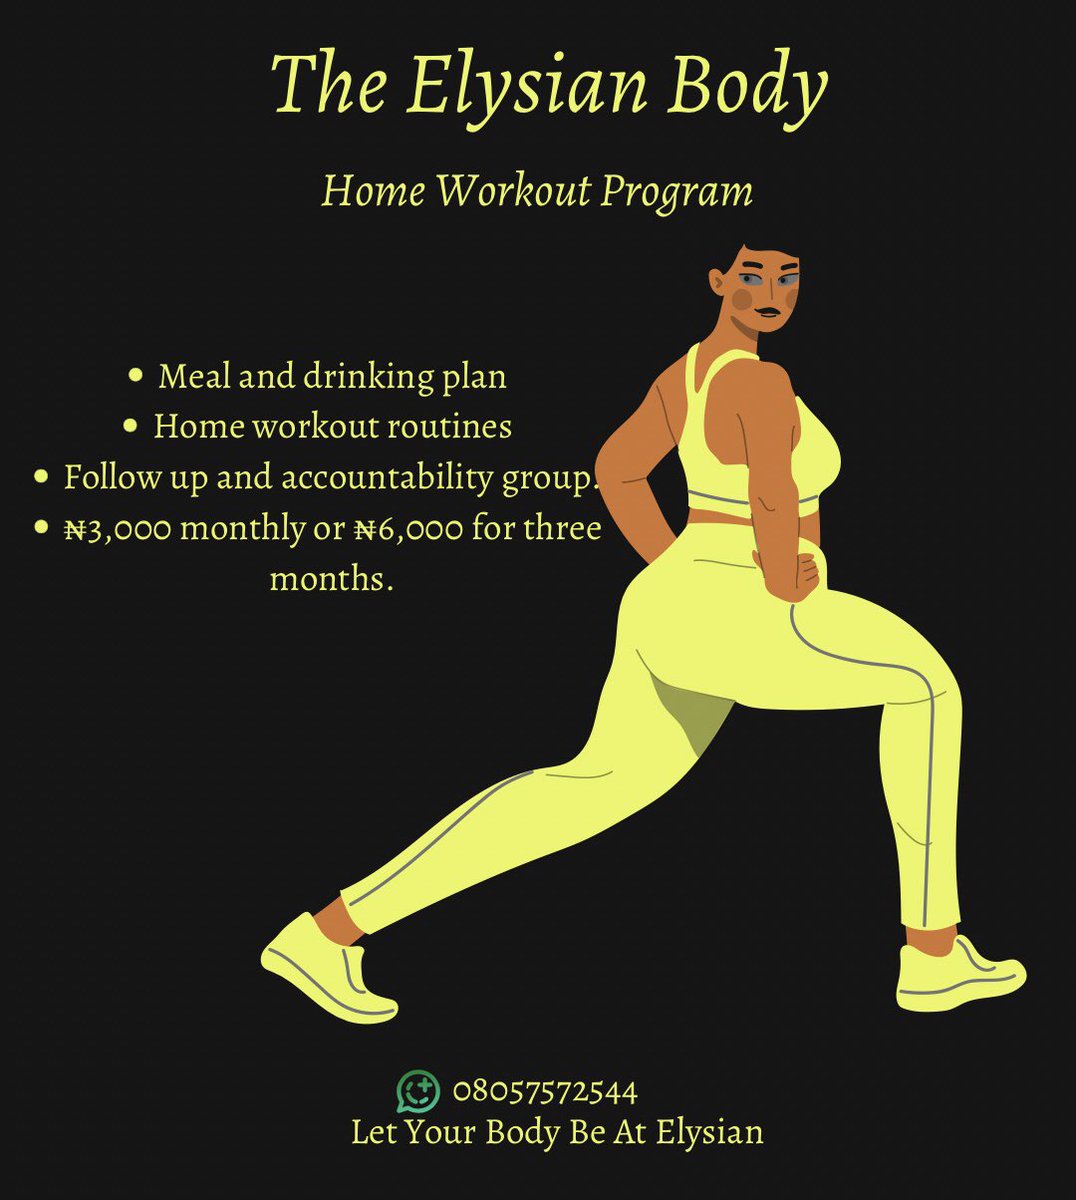 Workout program,

- Meal & drink plan 
-Home workout routines 
-Follow up and accountability group
₦3,000 - monthly
₦6,000 - 3 months 

If you are honest and consistent with yourself, you’d start seeing results in 2 weeks.

08057572544(WhatsApp)
Let Your Body Be At Elysian.
✨